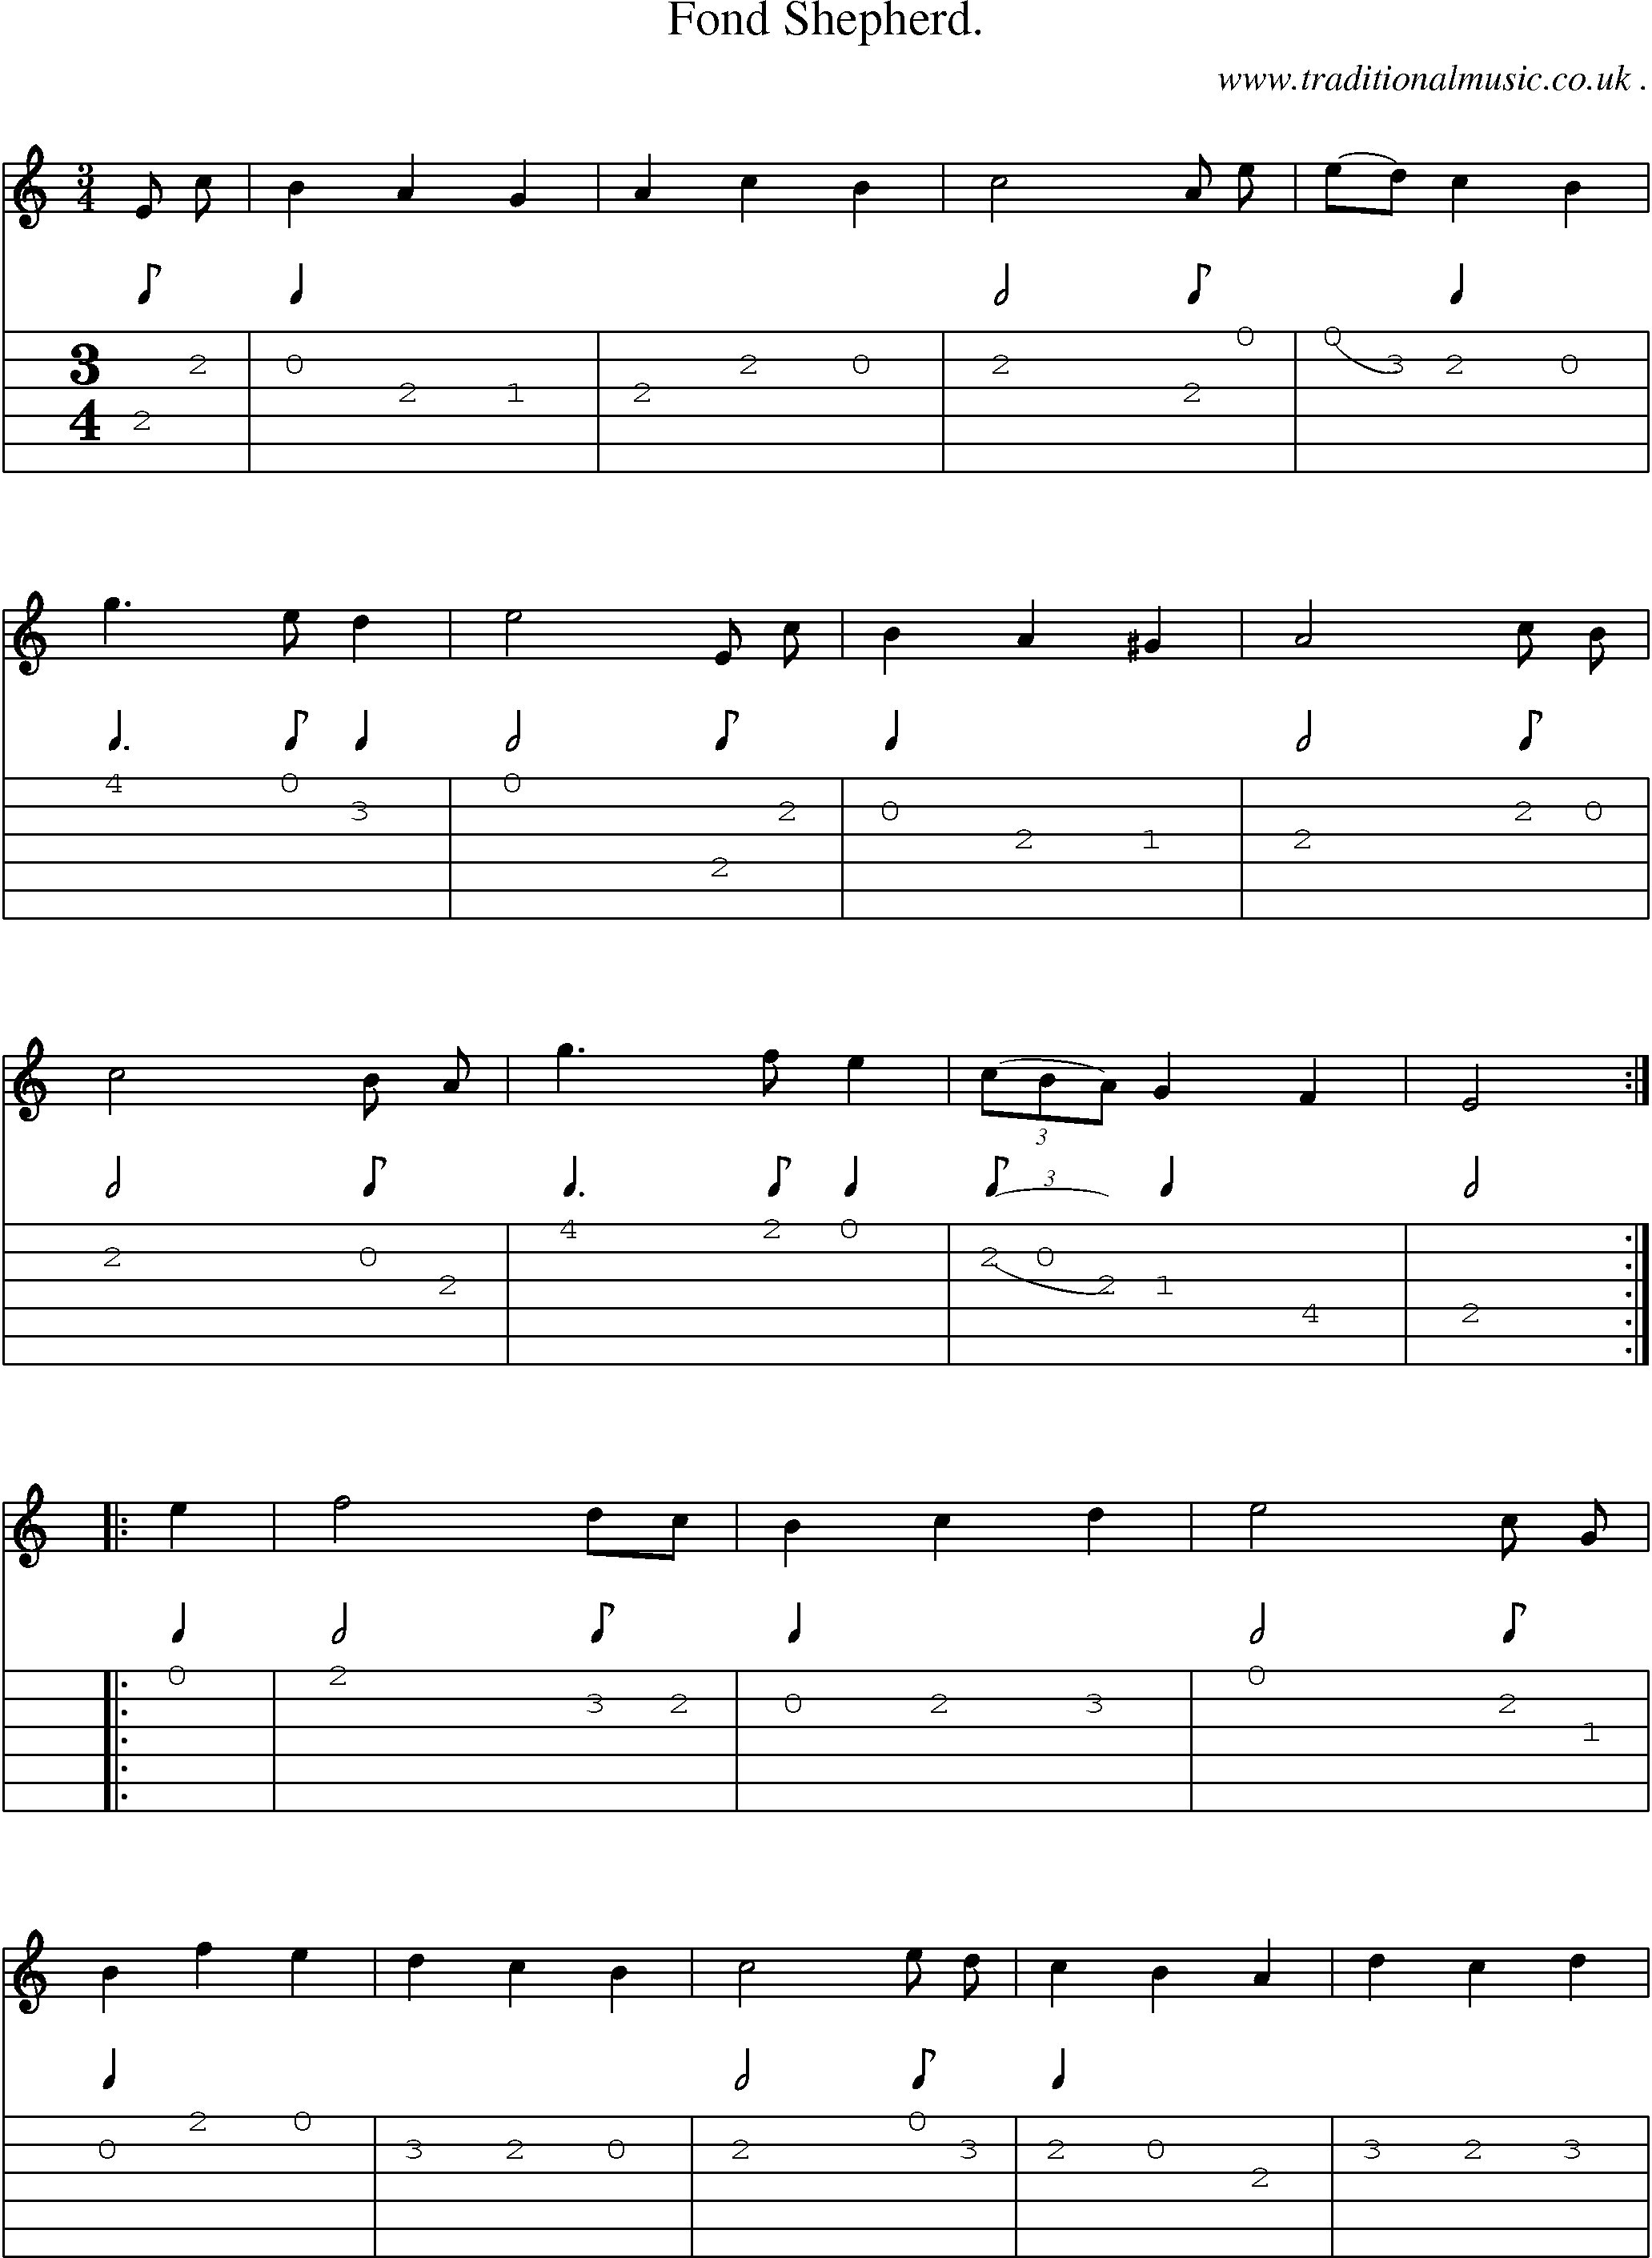 Sheet-Music and Guitar Tabs for Fond Shepherd